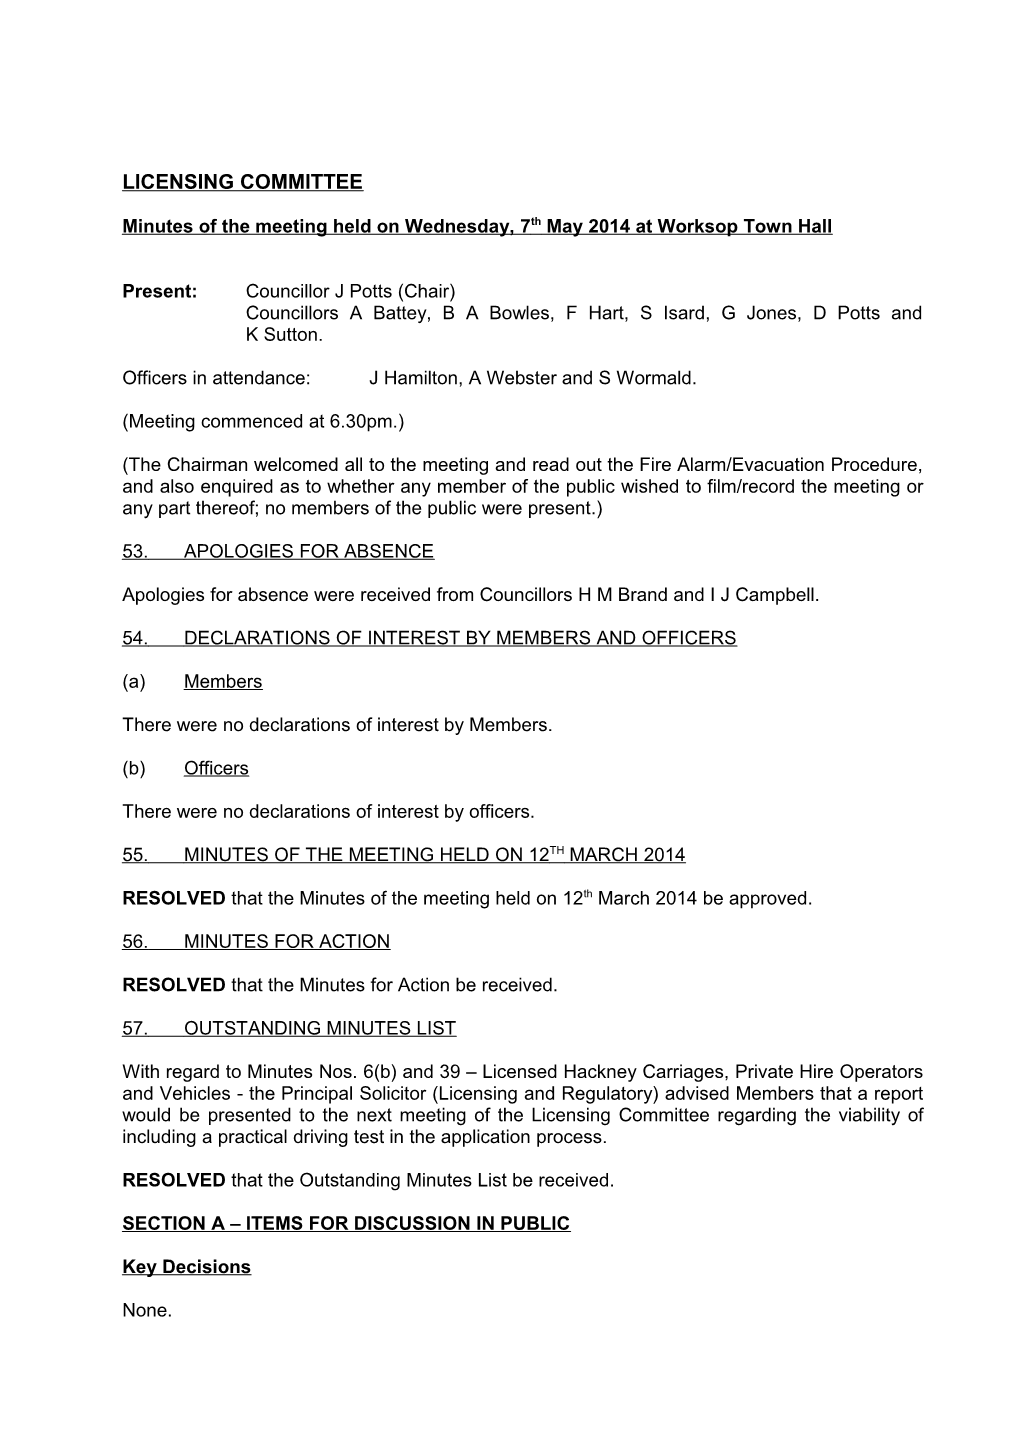 Minutes of the Meeting Held on Wednesday, 7Th May 2014 at Worksop Town Hall